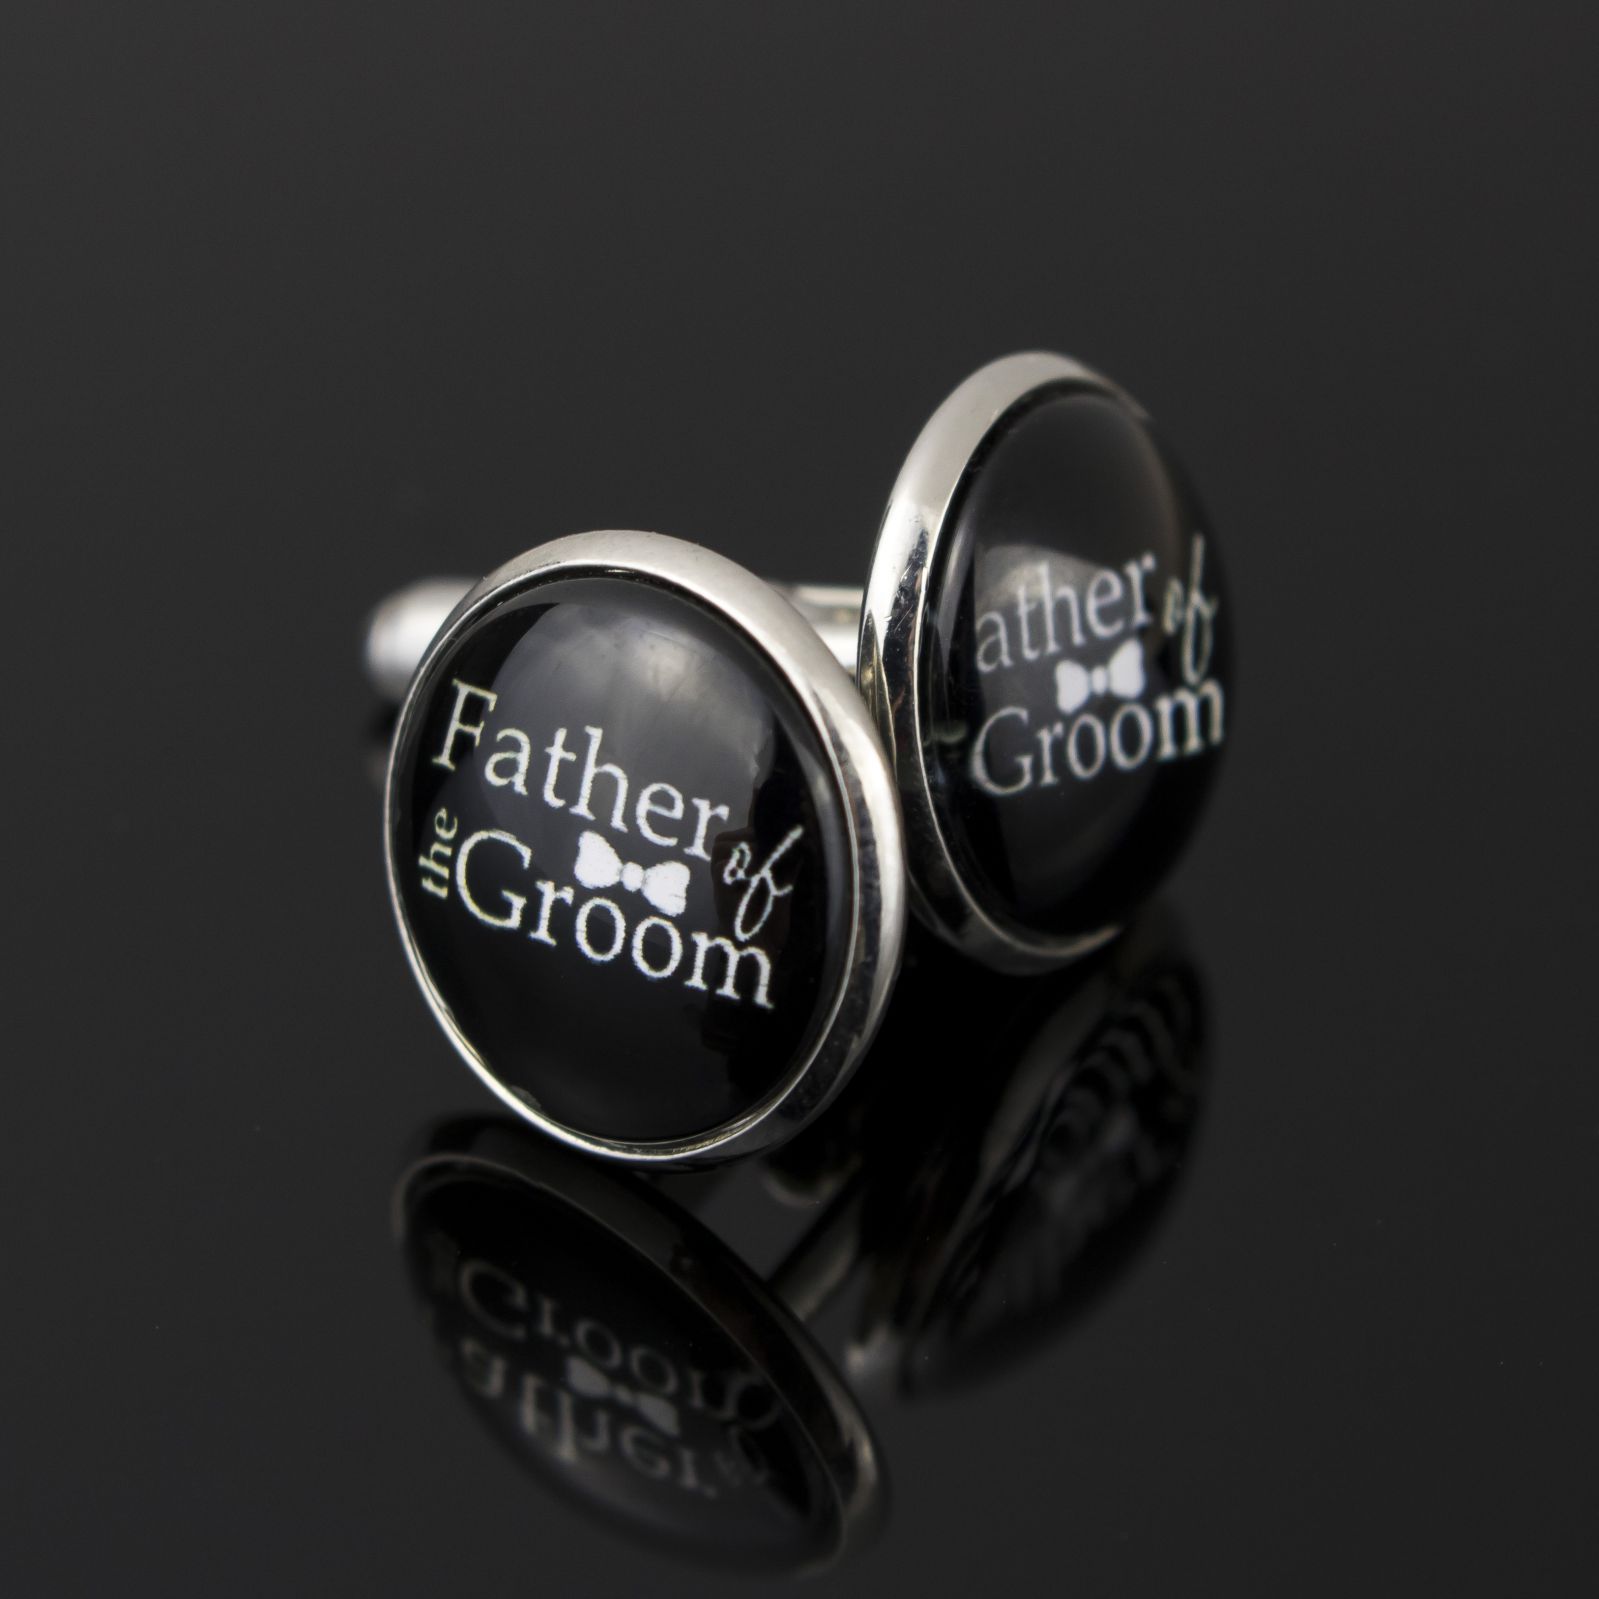 black round cufflinks with father of the groom written in white including a small bow tie in between the words